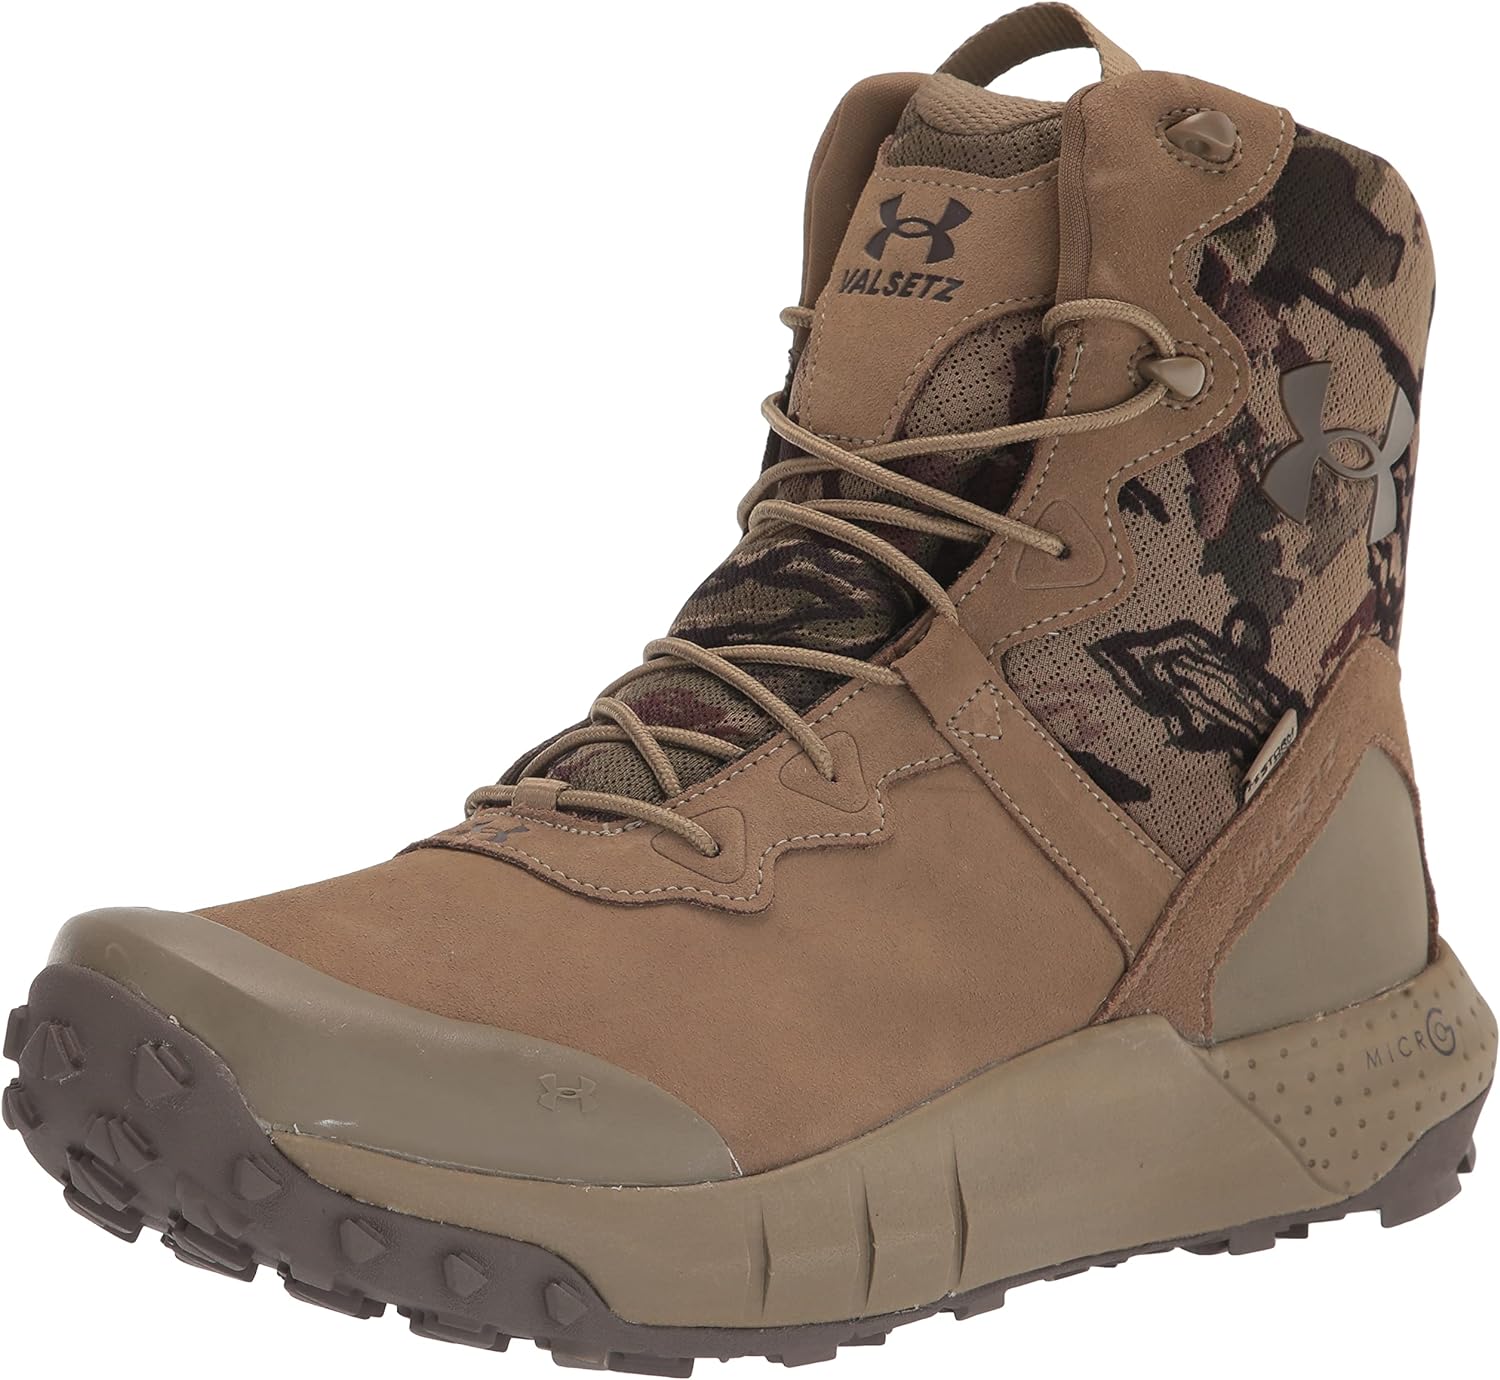 Best Hunting Boot: Top Picks for Your Next Outdoor Adventure